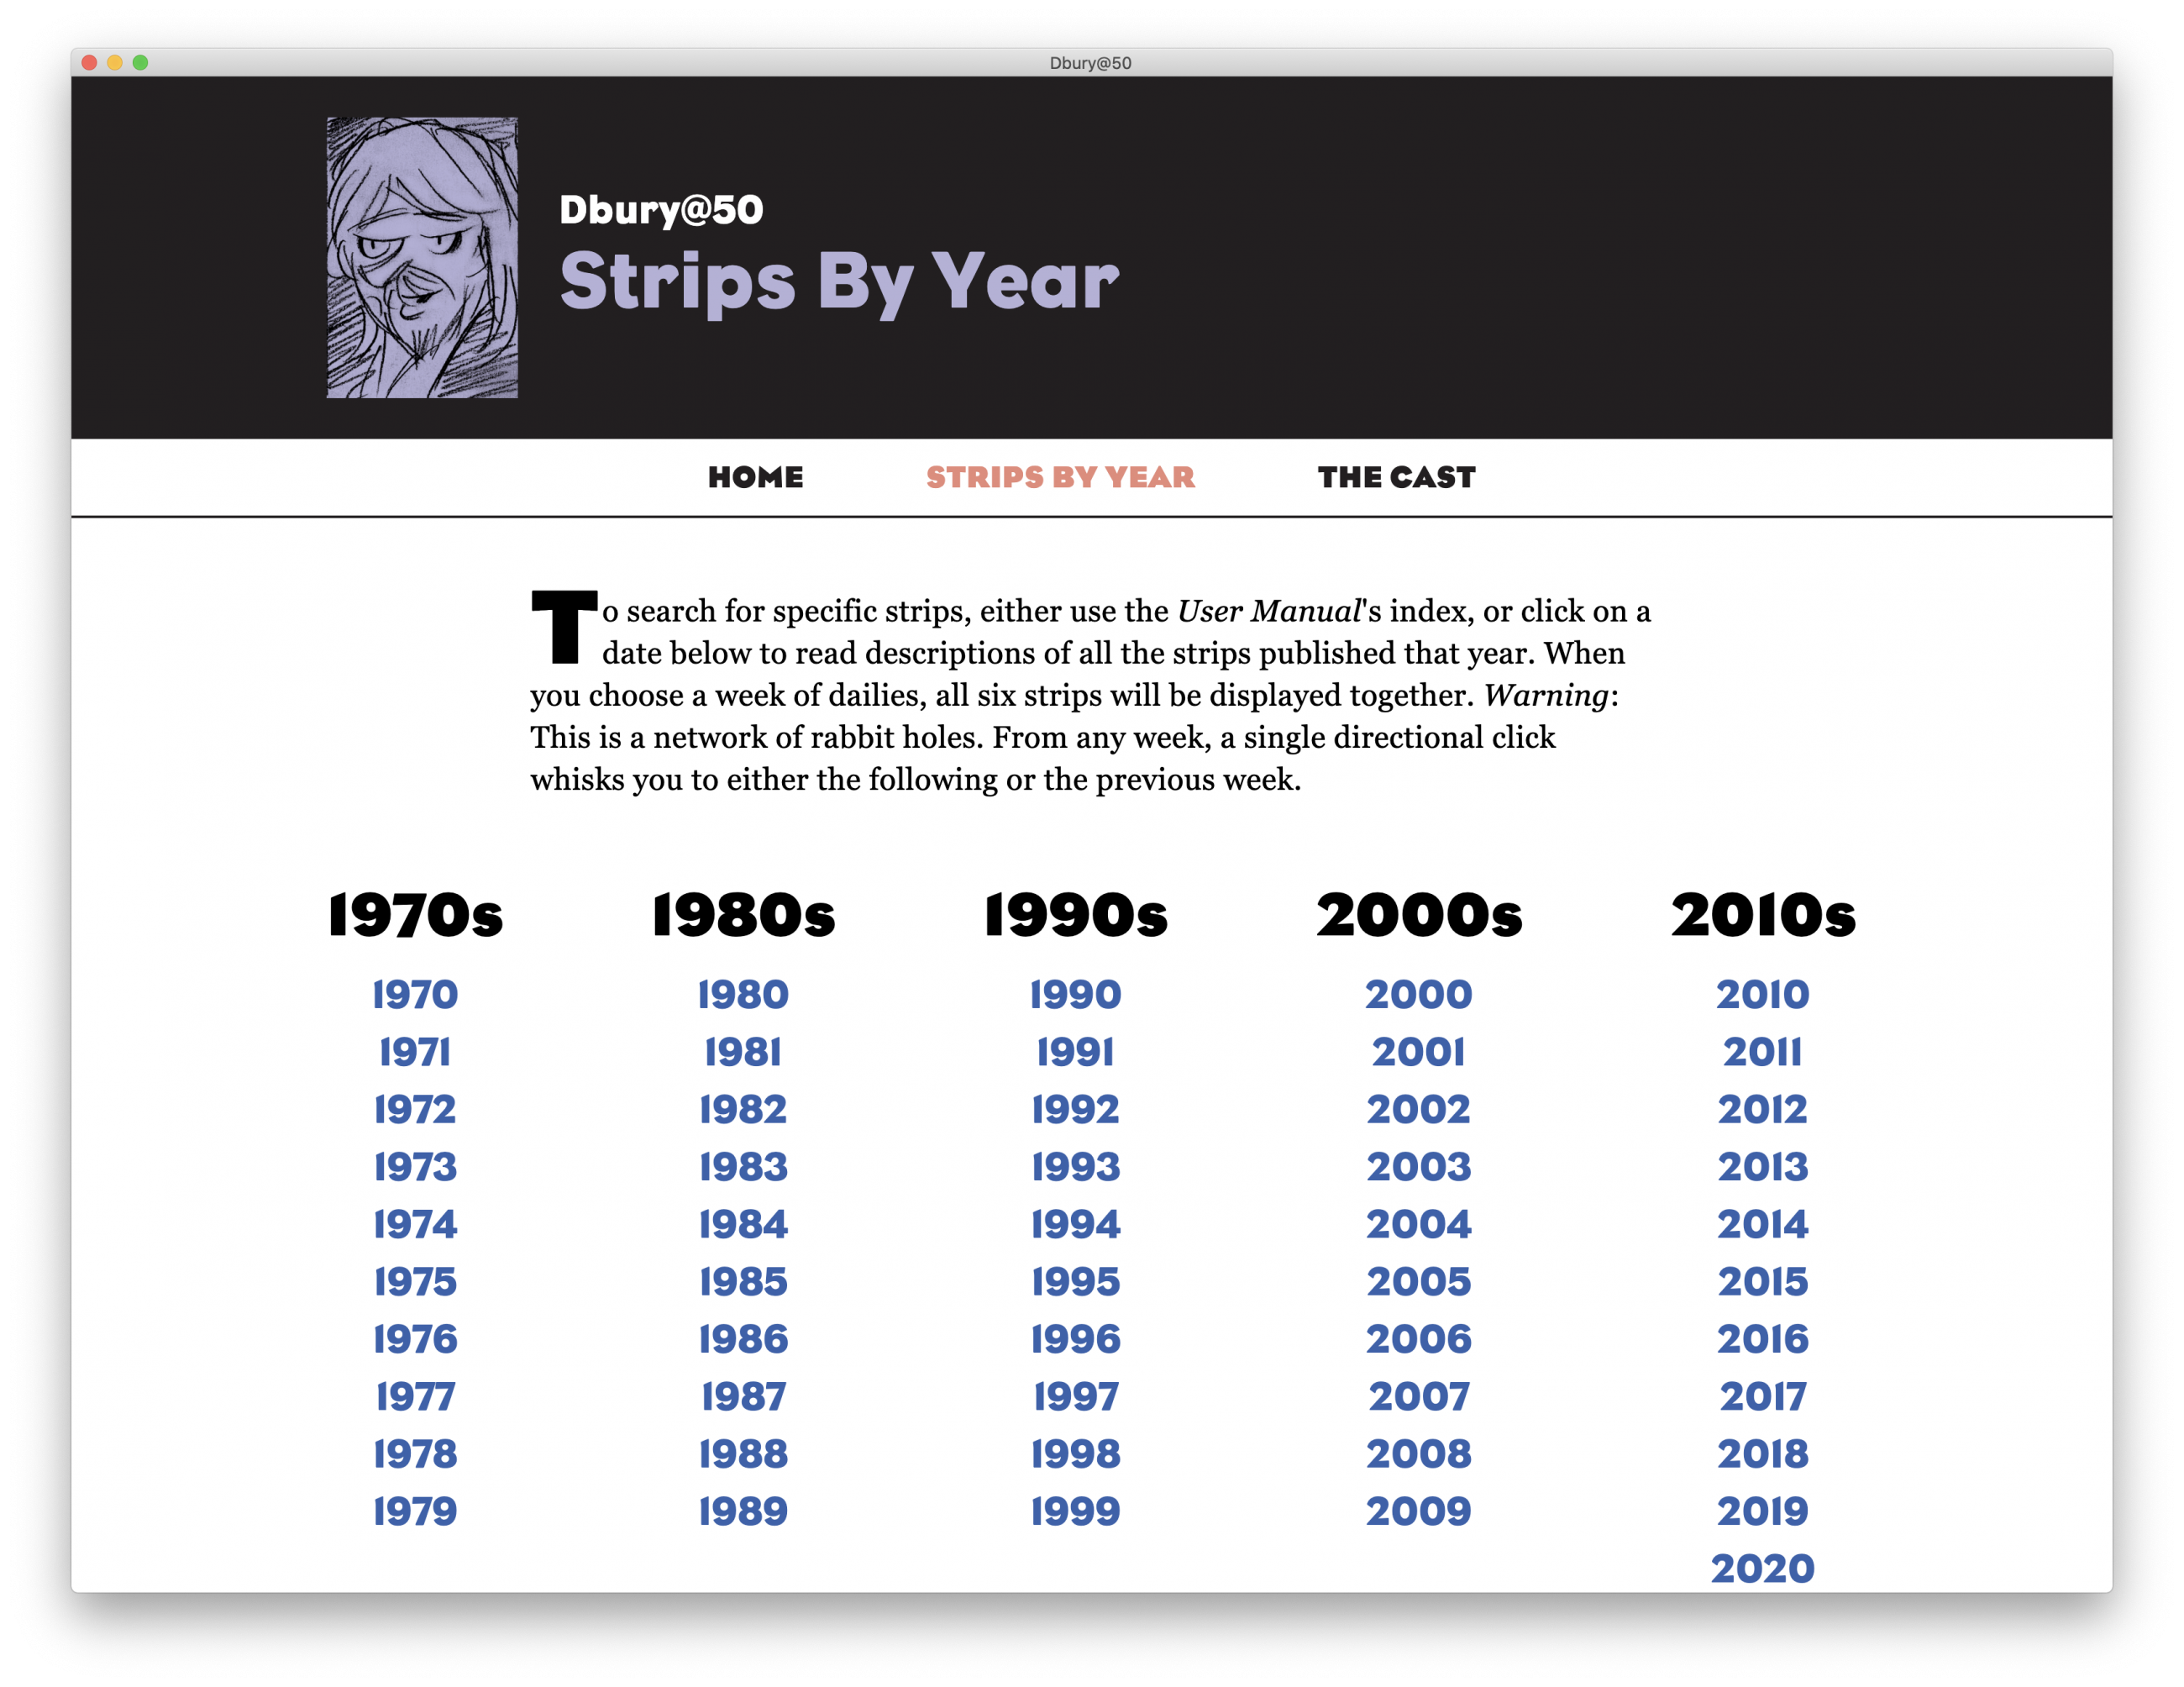 Strips by year